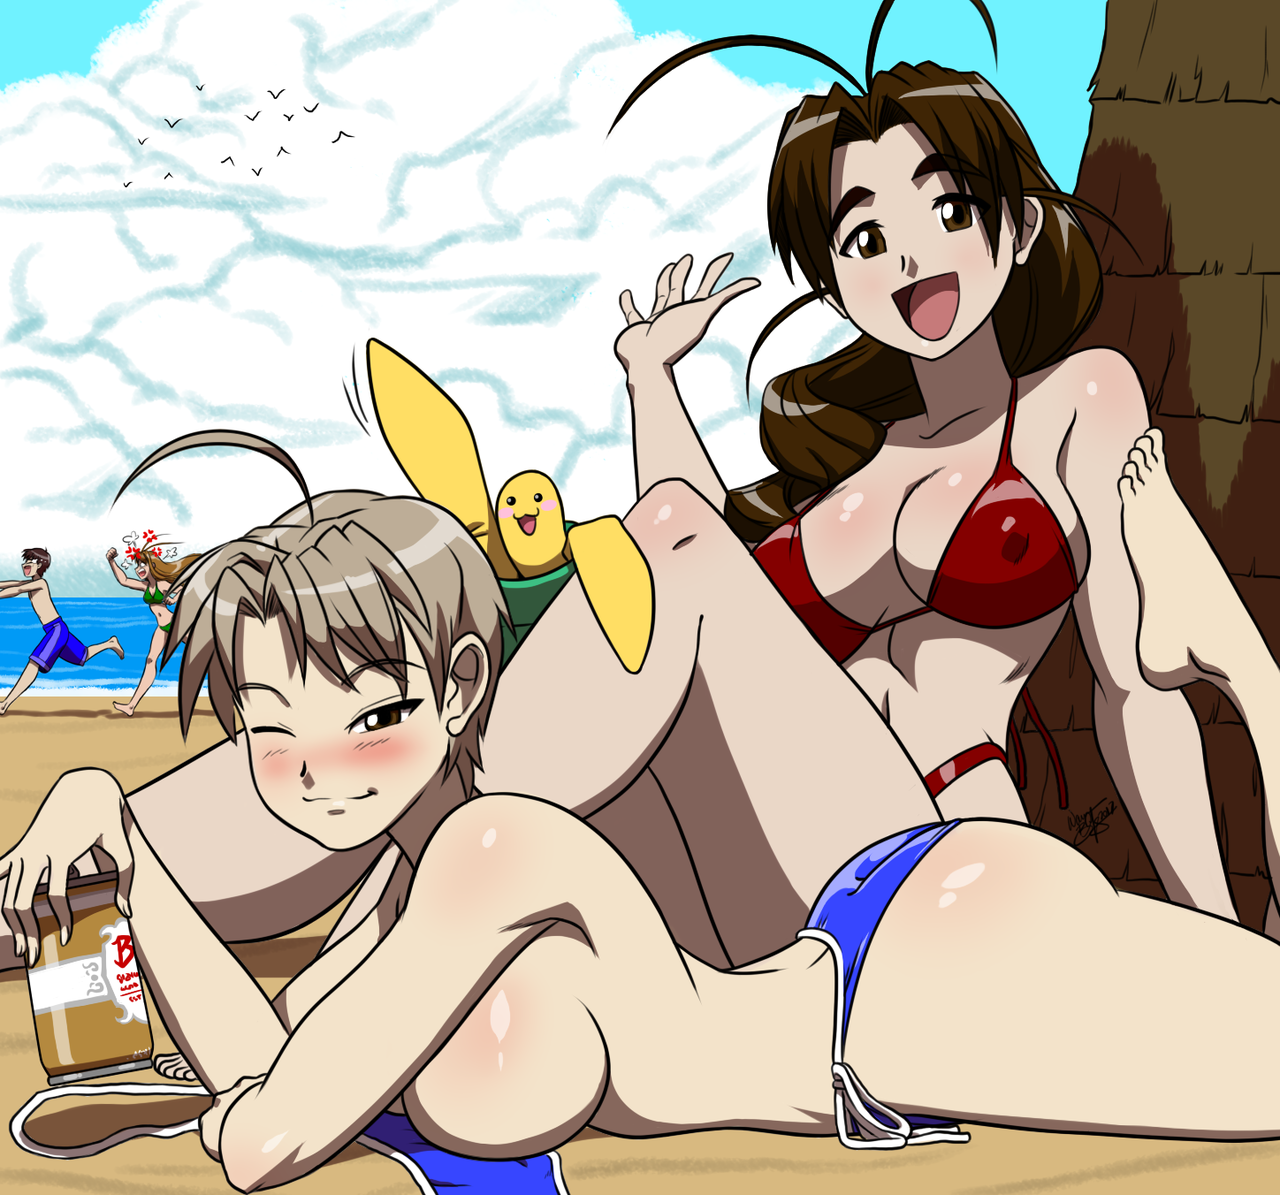 aeolus06: Love in the sun   Time to spend Summer with Love Hina’s best girls! 